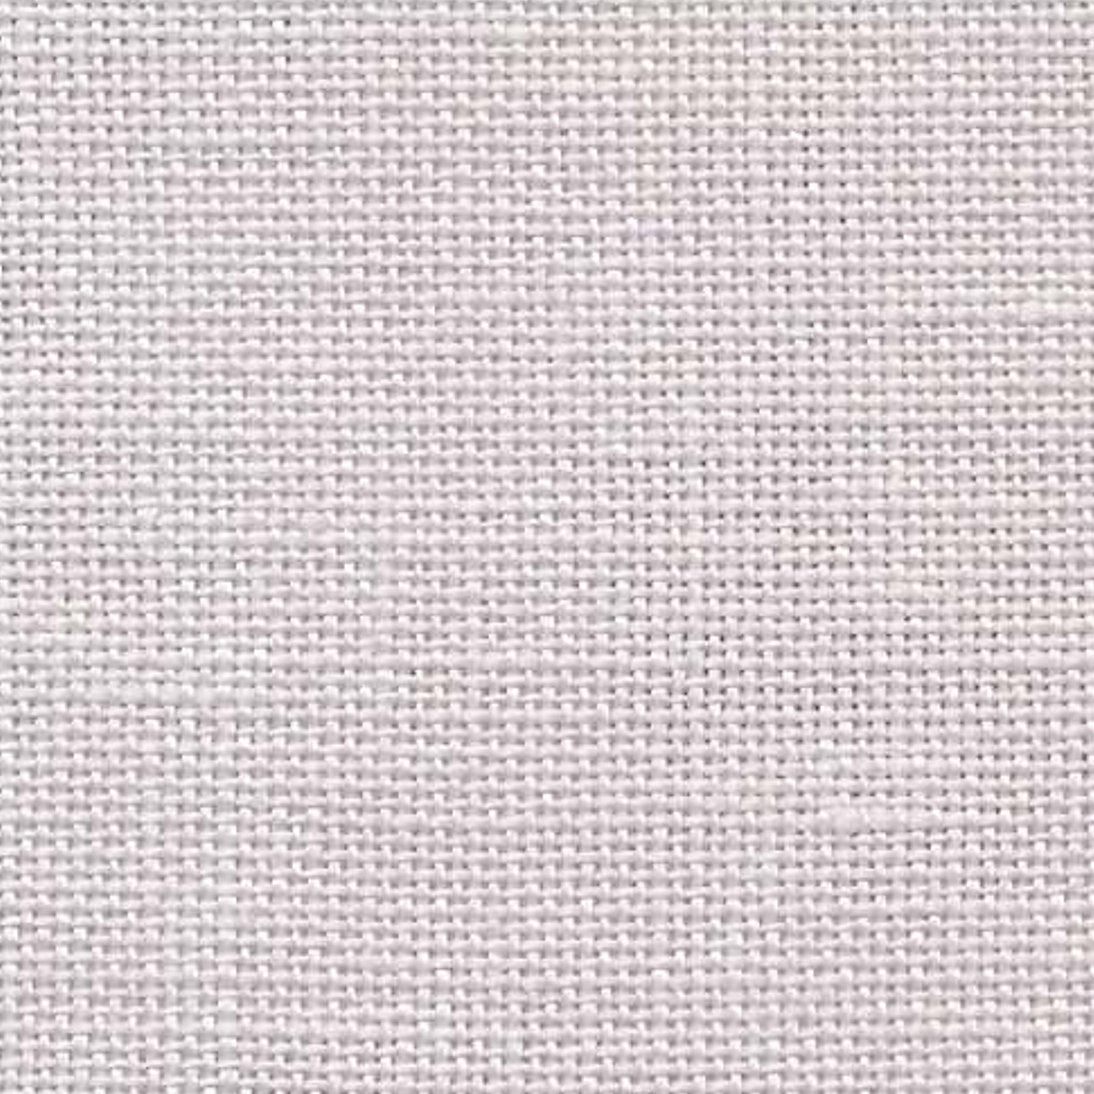 Belfast fabric 32 ct. ZWEIGART Pastel Lilac 3609/2055 - 100% Fine Linen for Subtle and Elegant Embroidery